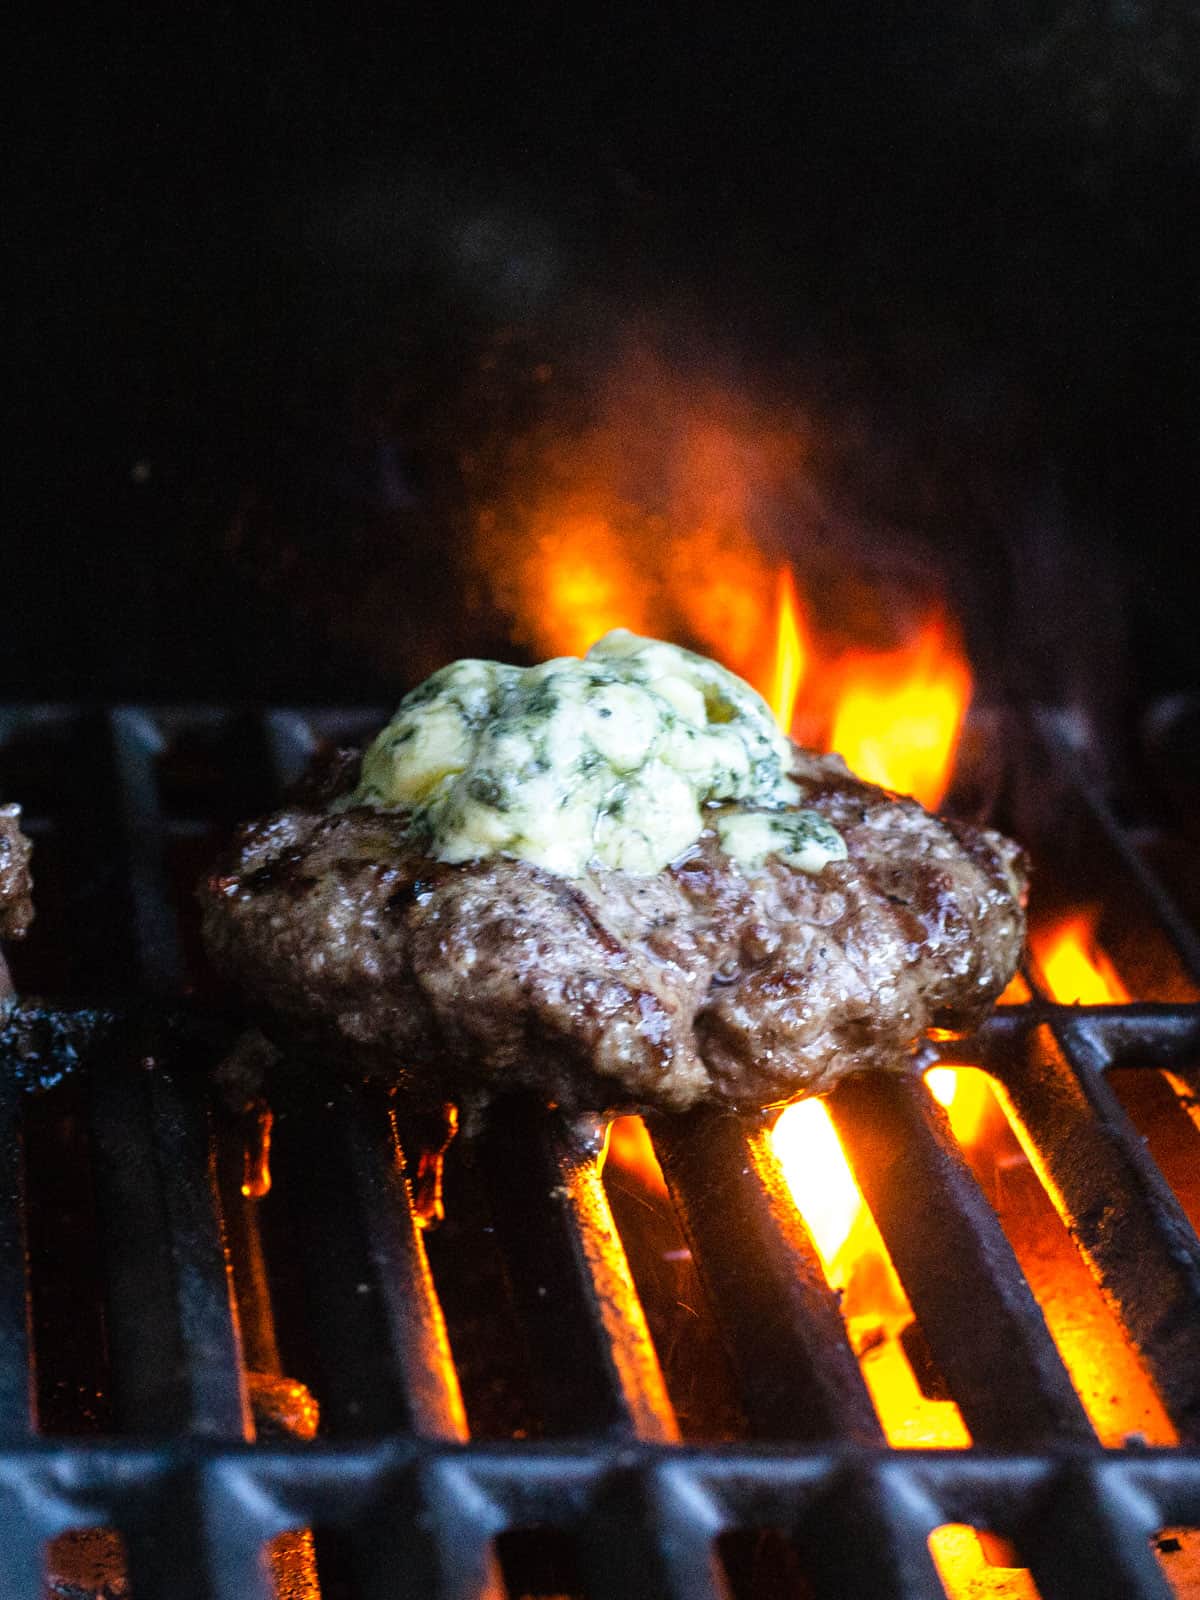 Top the grilled burgers with blue cheese for the last minute to melt the cheese slightly.